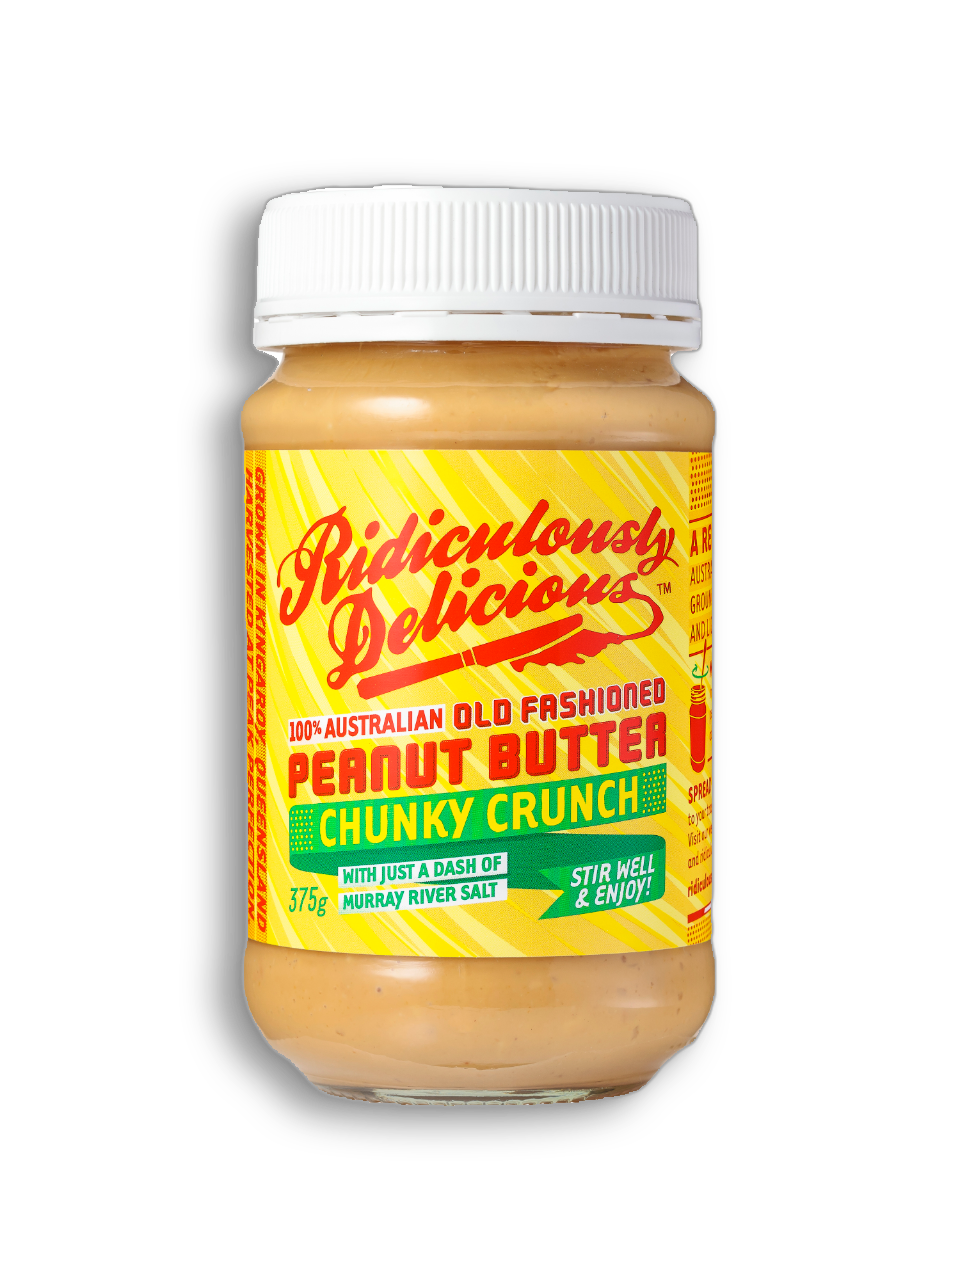 Ridiculously Delicious - Chunky Crunch Peanut Butter 12 x 375g